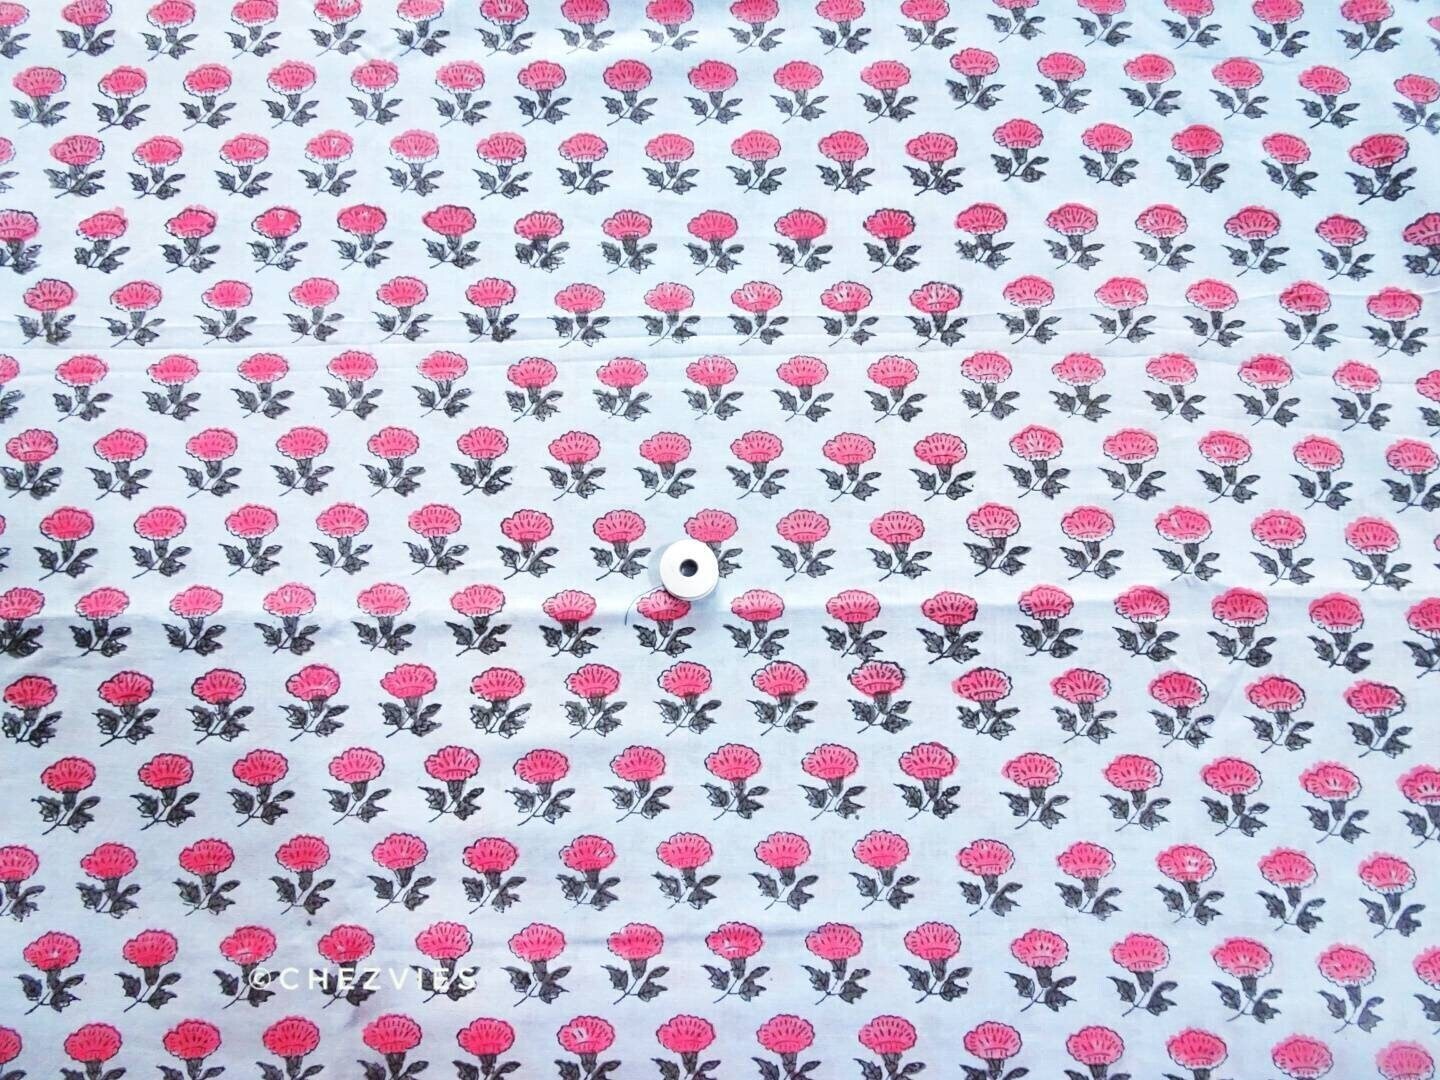 Floral Cotton Fabric, Hand Block Print Fabrics, Light Blue Pink, 44 inches wide sold by half yard